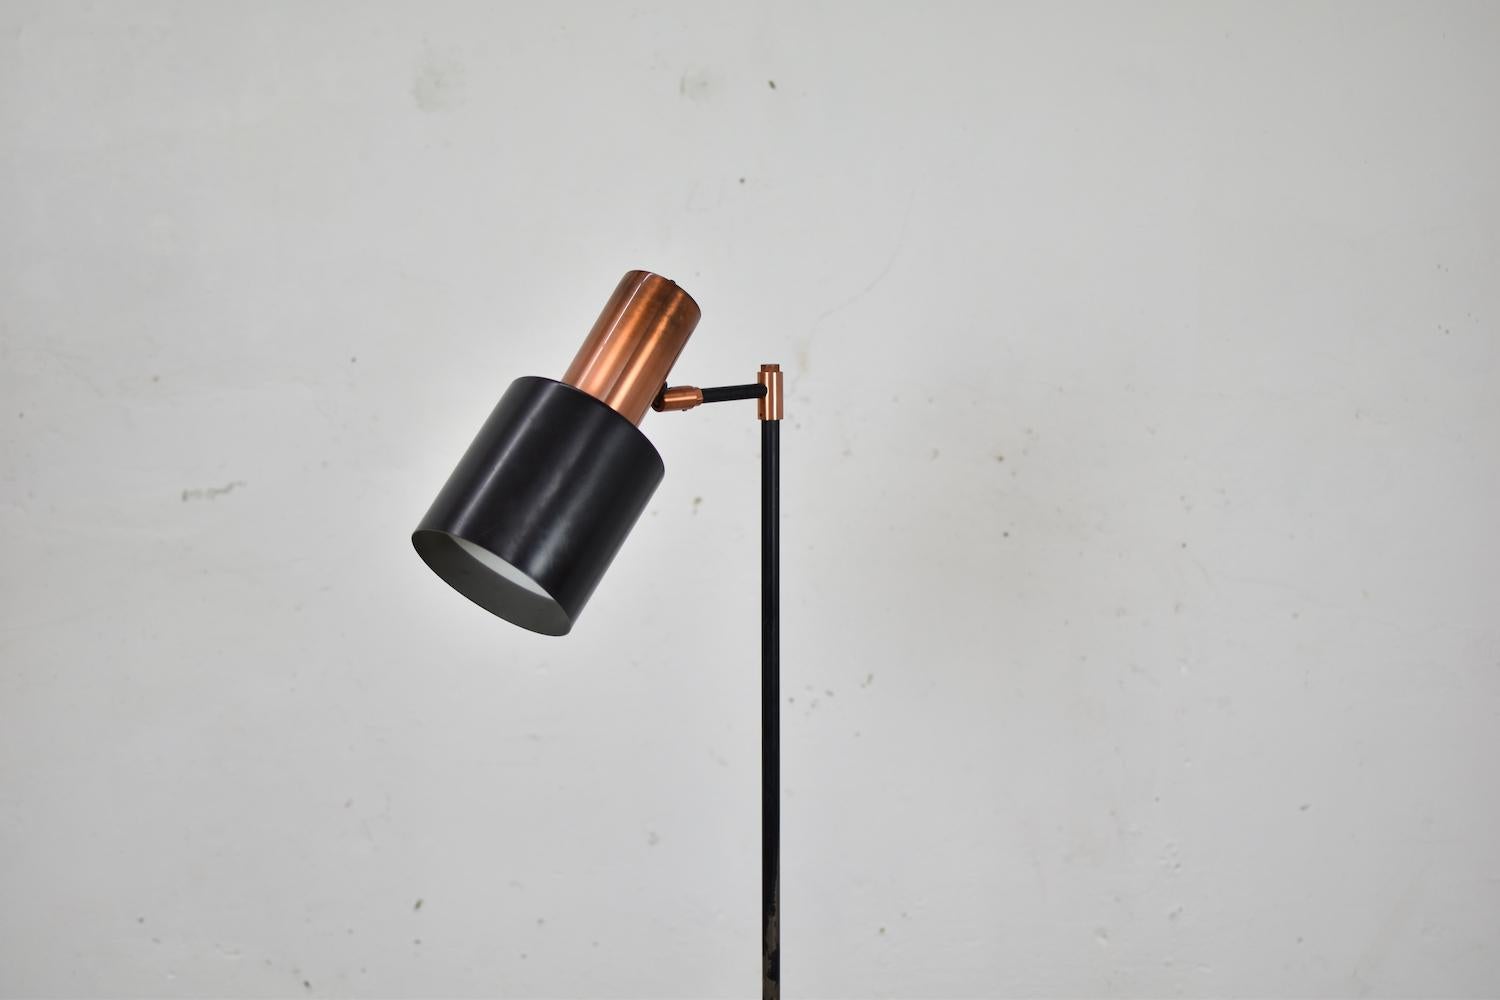 Lovely brass ‘Studio’ floor lamp designed by Jo Hammerborg for Fog & Mørup, Denmark, 1960s. This midcentury floor lamp is made out of brass and black lacquered copper. Clean lines, just perfect!